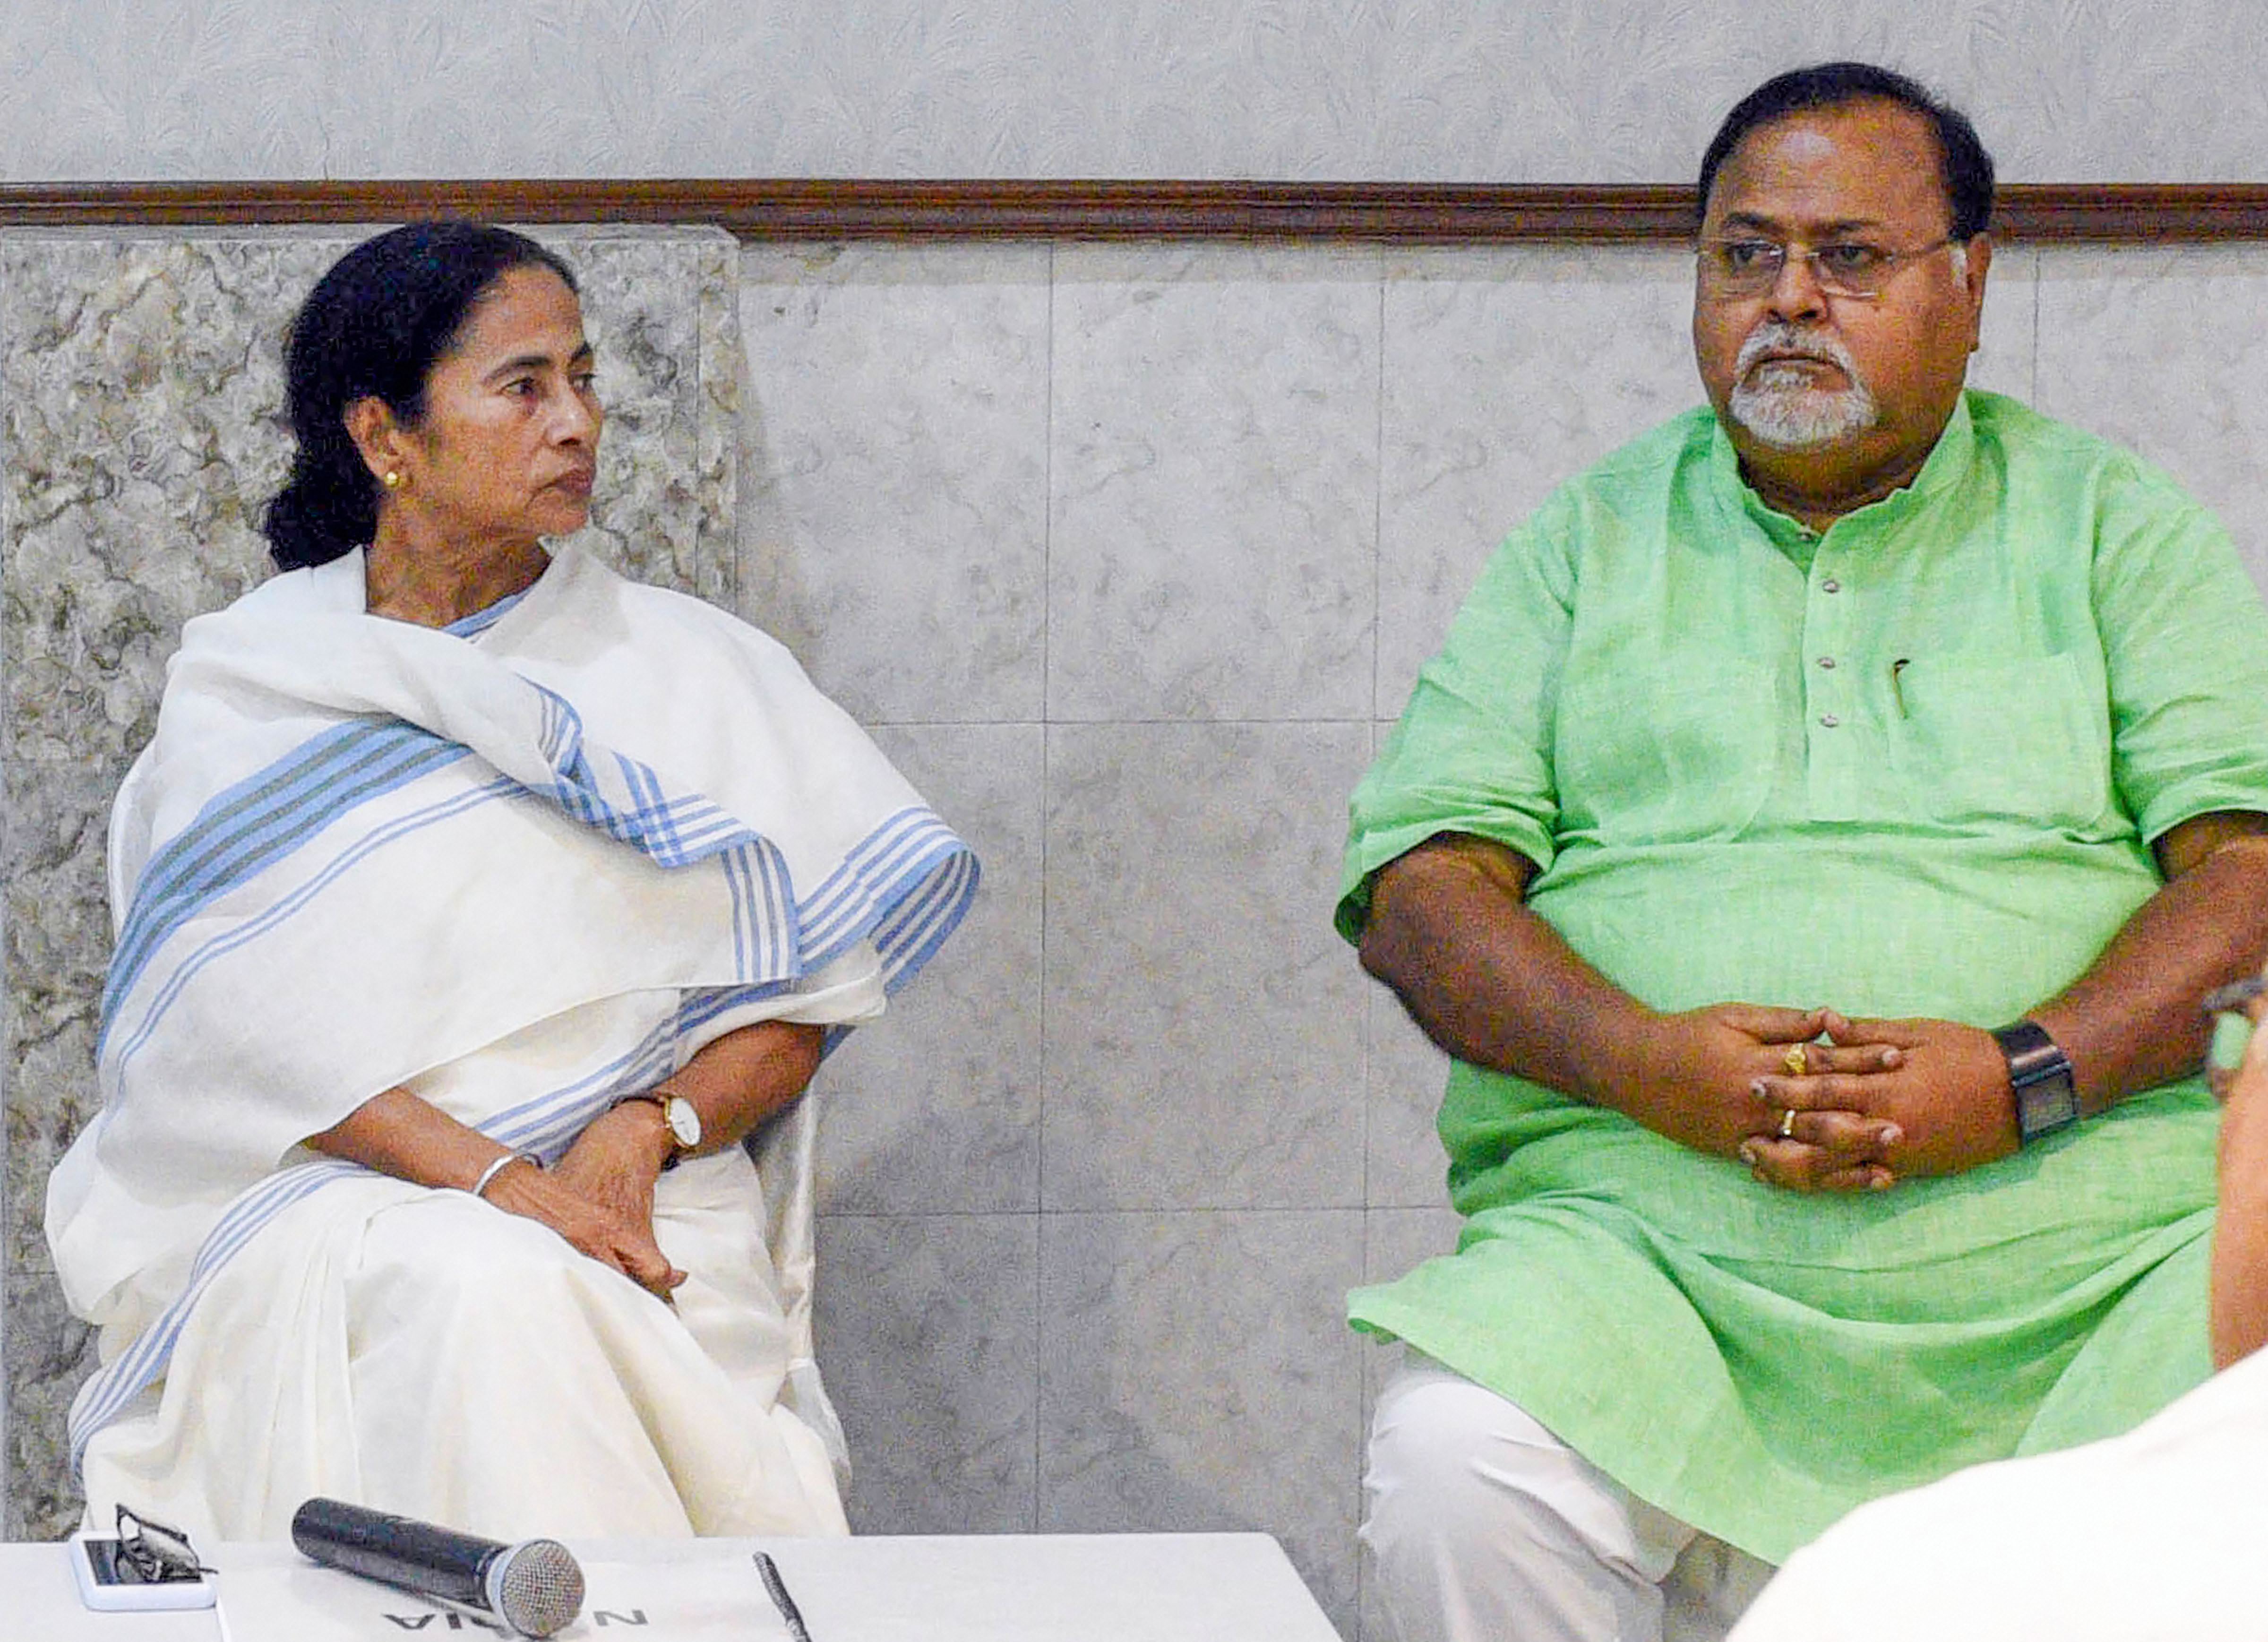 Partha Chatterjee arrest: The guilty must be punished, says Mamata